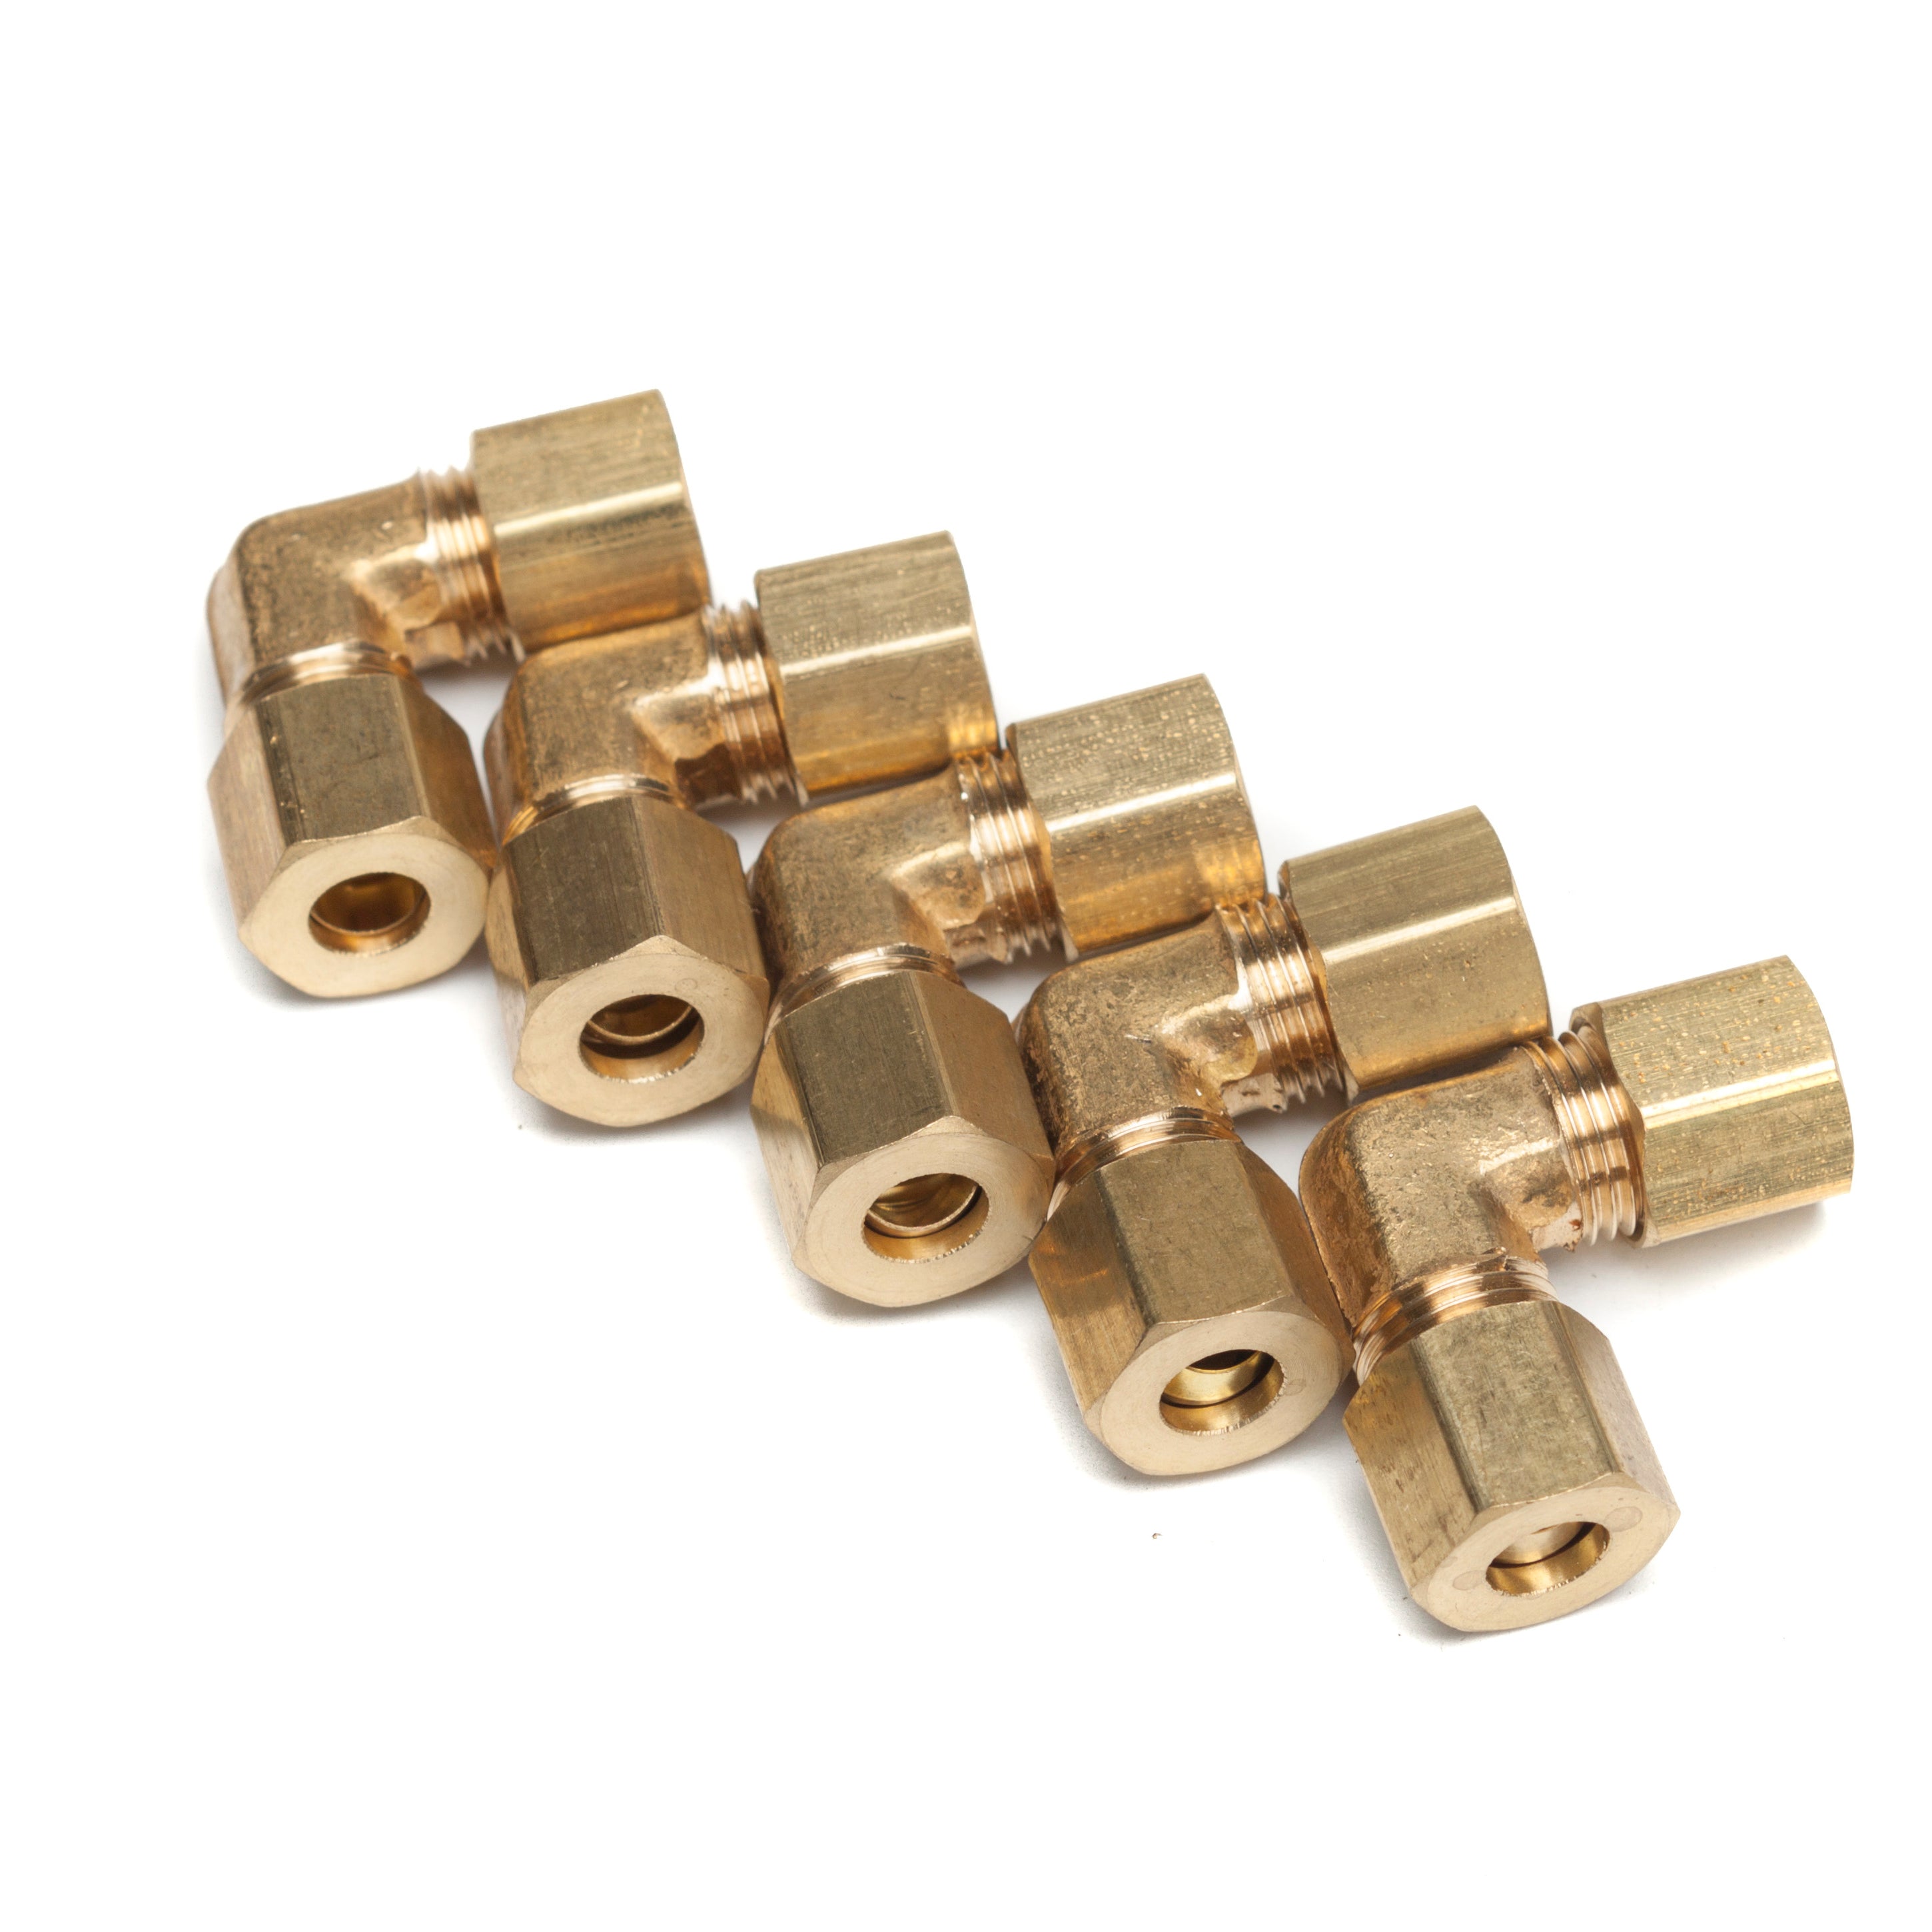 LTWFITTING 1/4-Inch OD 90 Degree Compression Union Elbow,Brass Compression Fitting(Pack of 5)